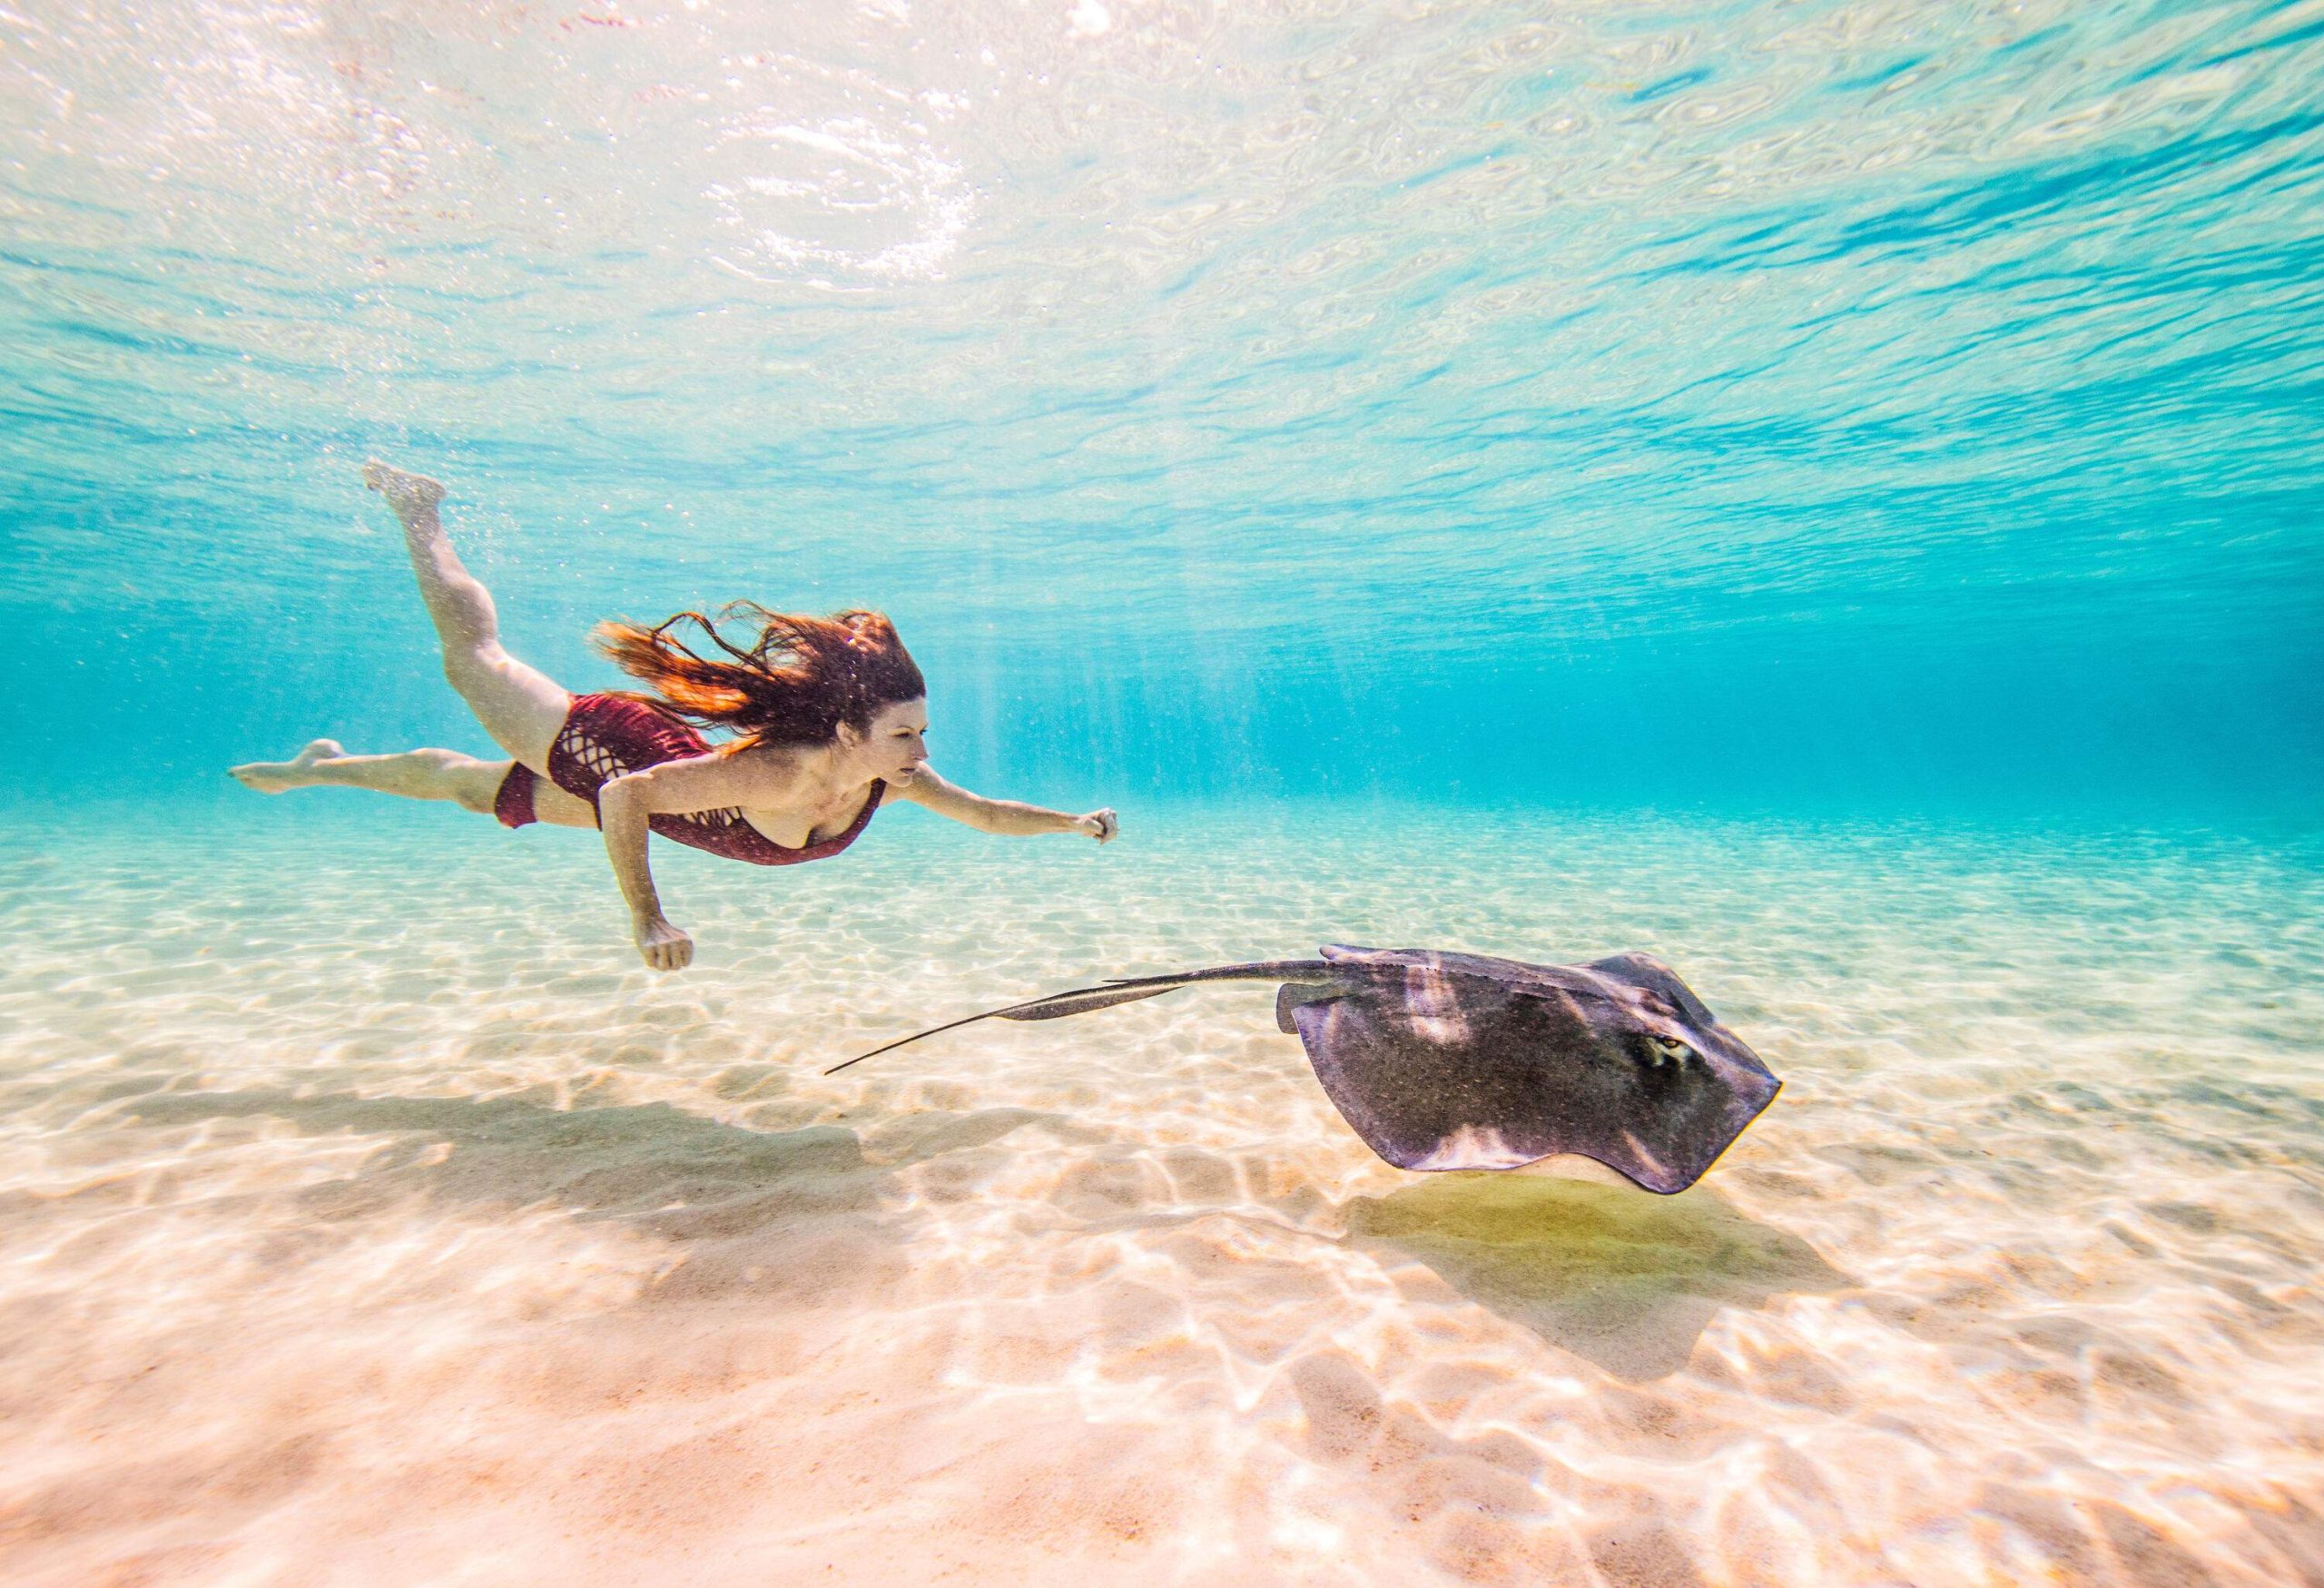 A woman swims underwater with a stingray.